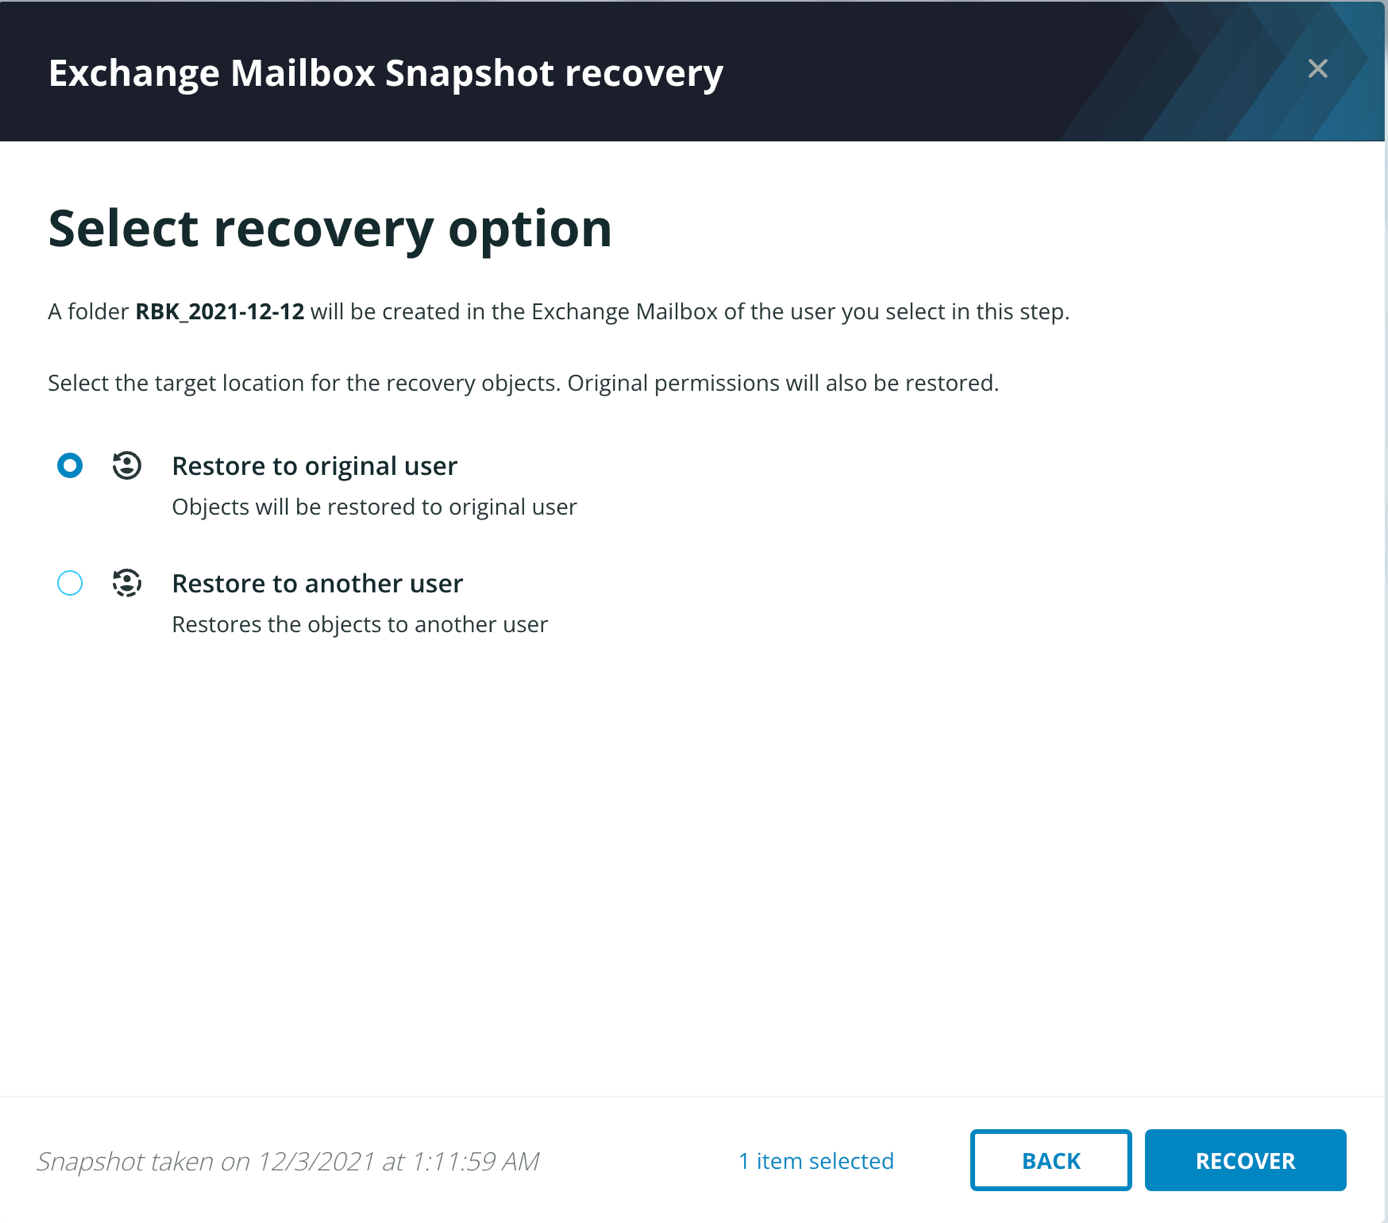 Select recovery option